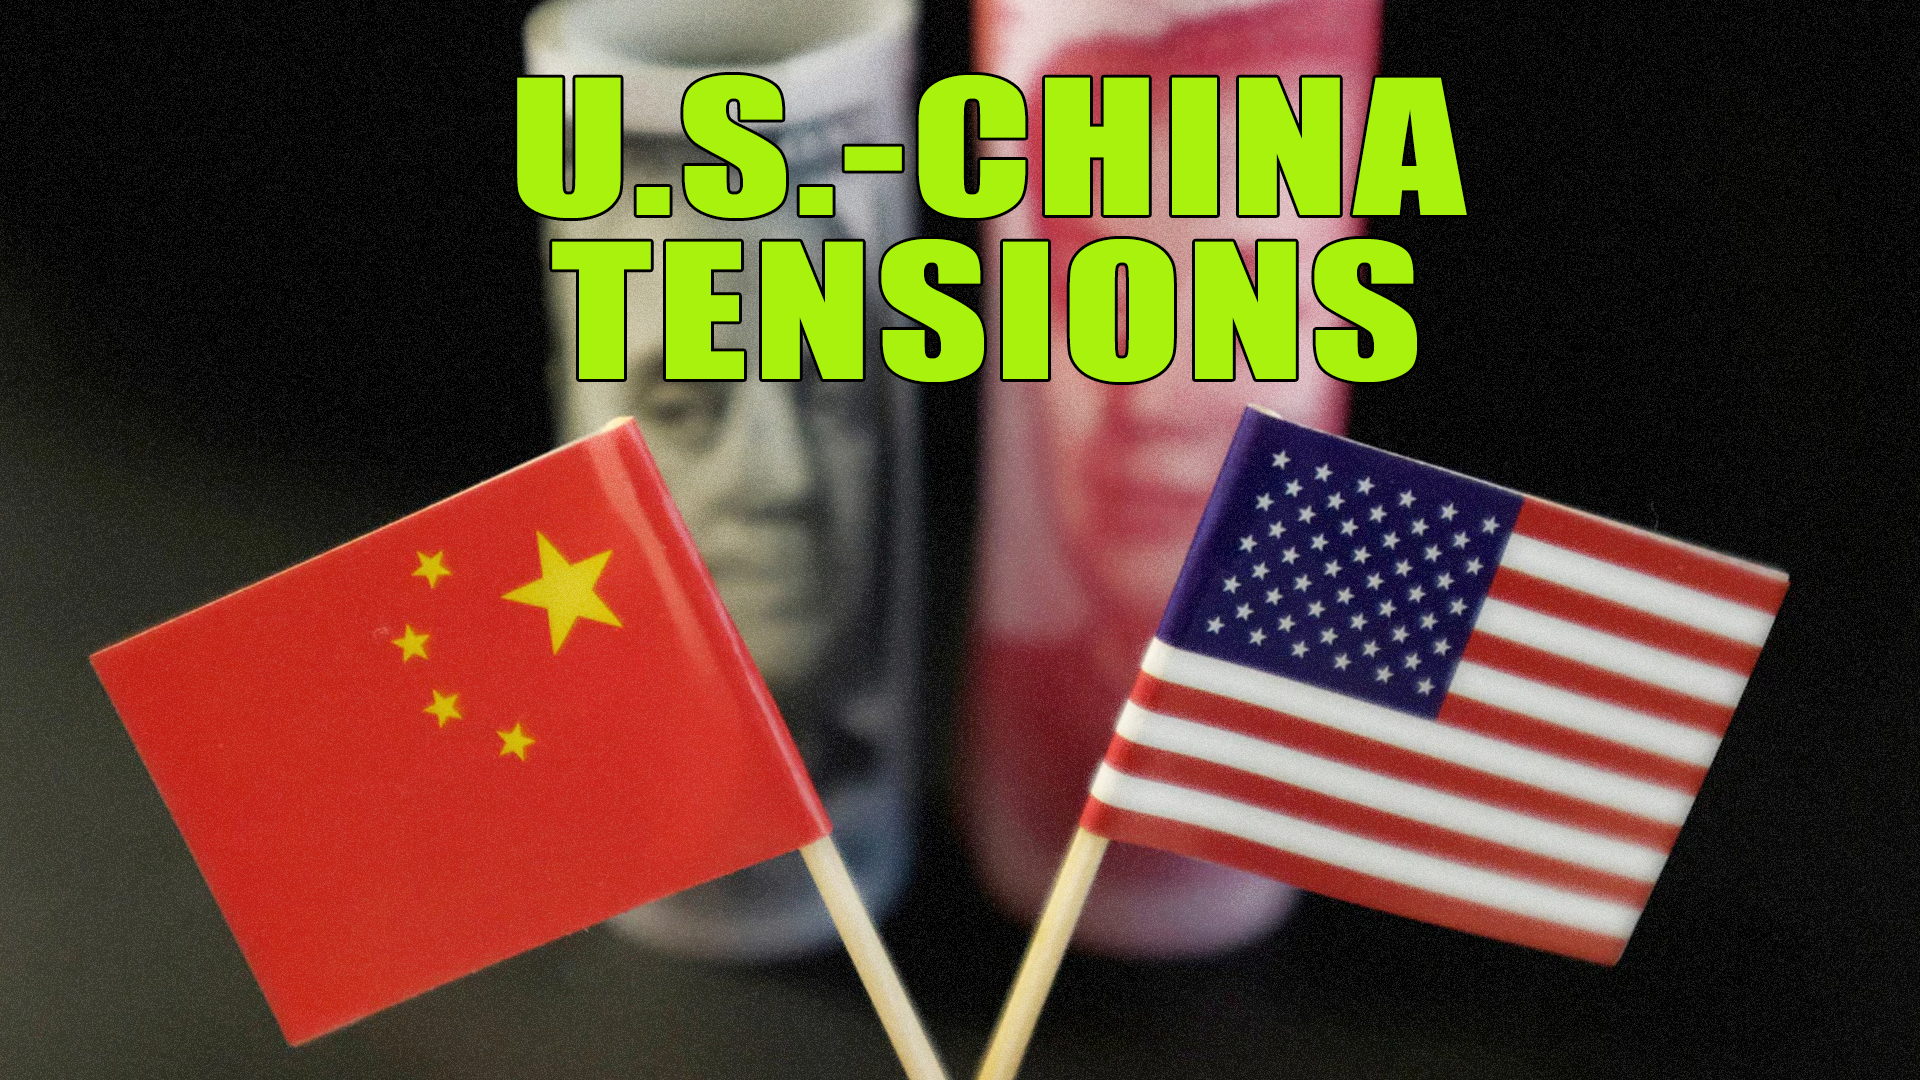 US hacking allegations against China